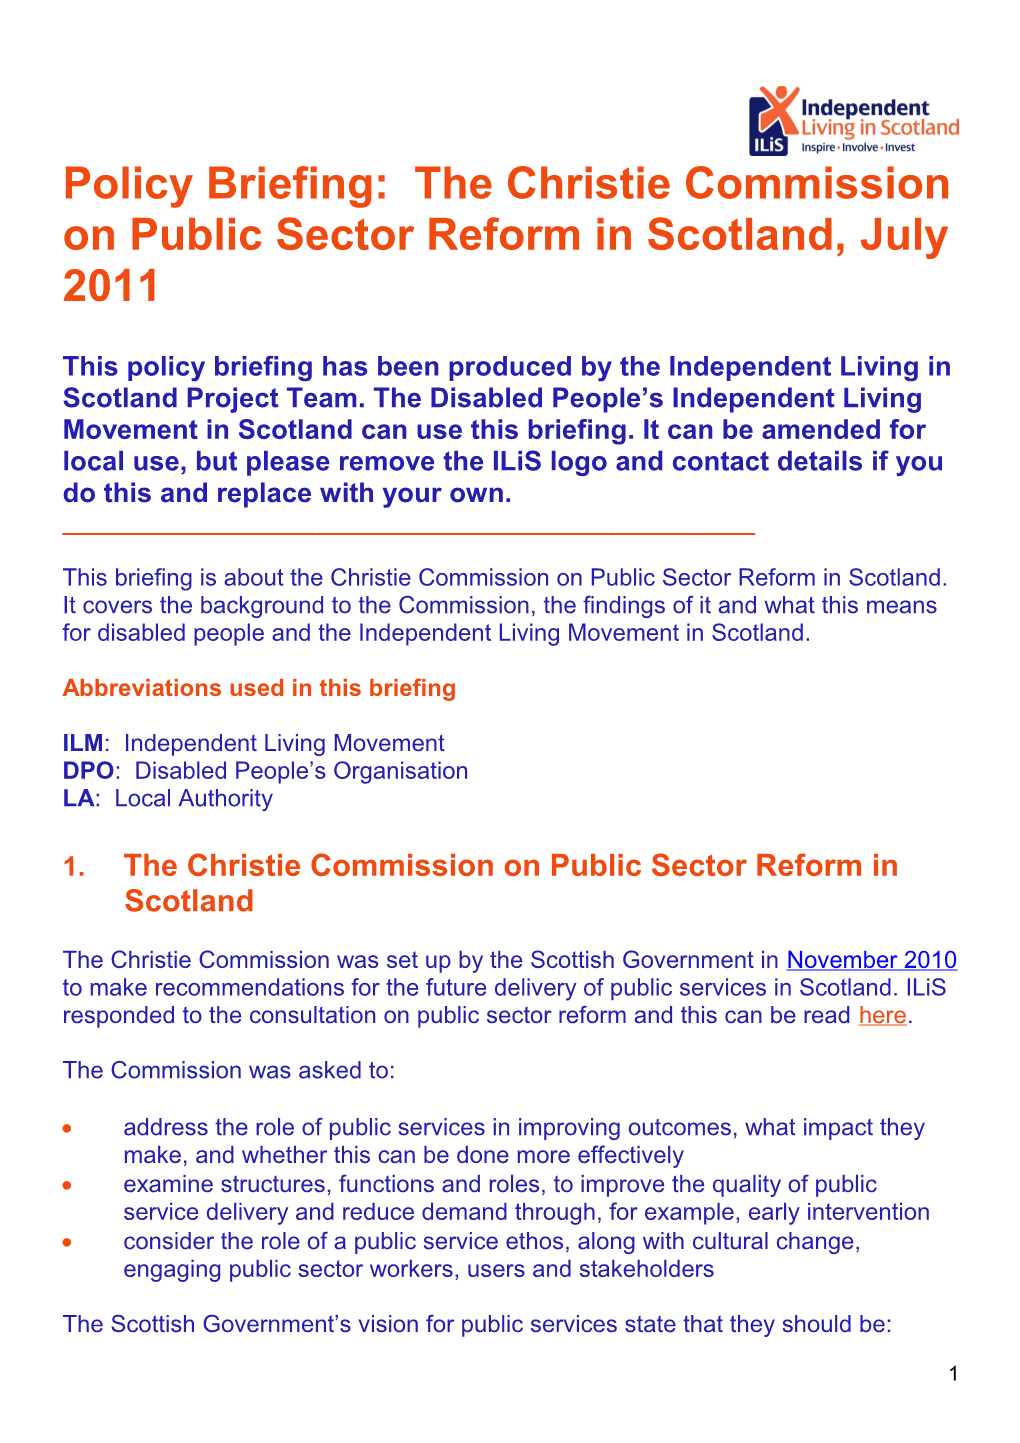 Policy Briefing: the Christie Commission on Public Sector Reform in Scotland, July 2011